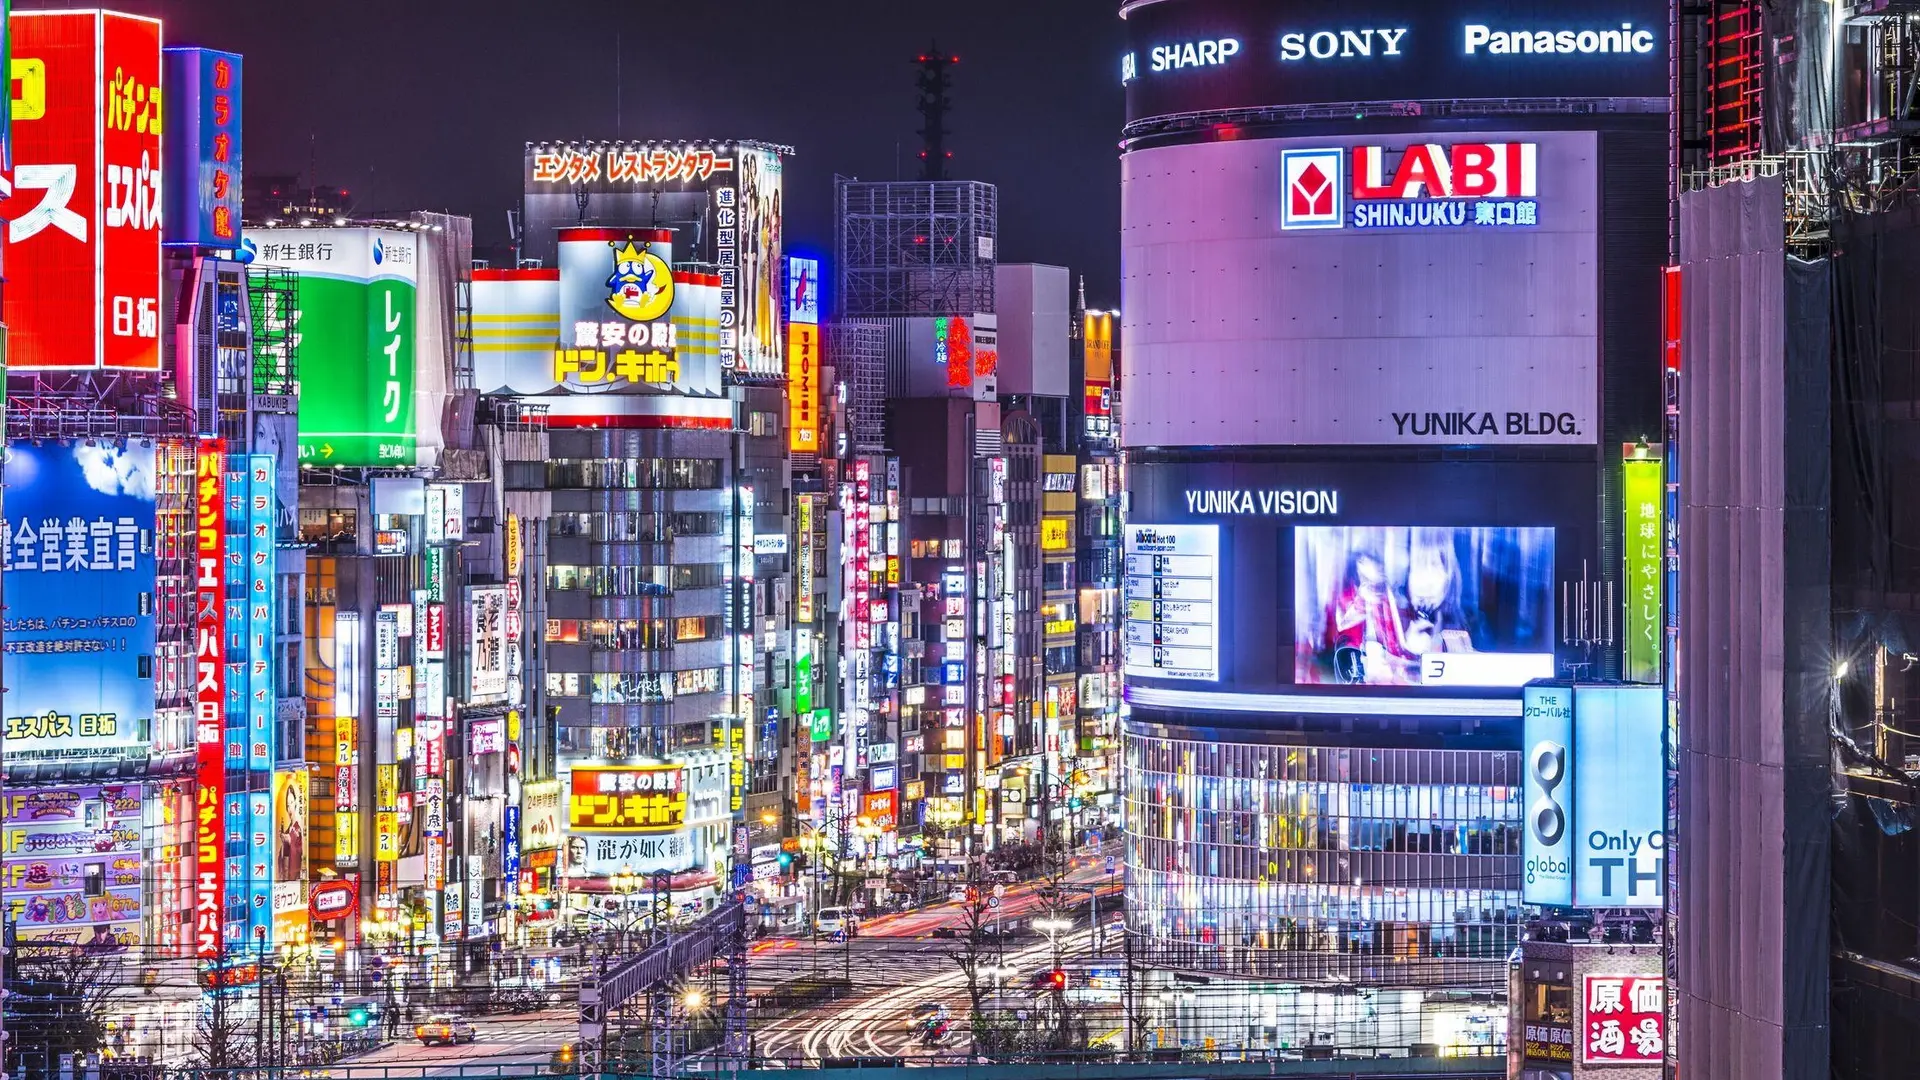 Artificial lightning, advertisements, and bust street Tokyo Nightlife.